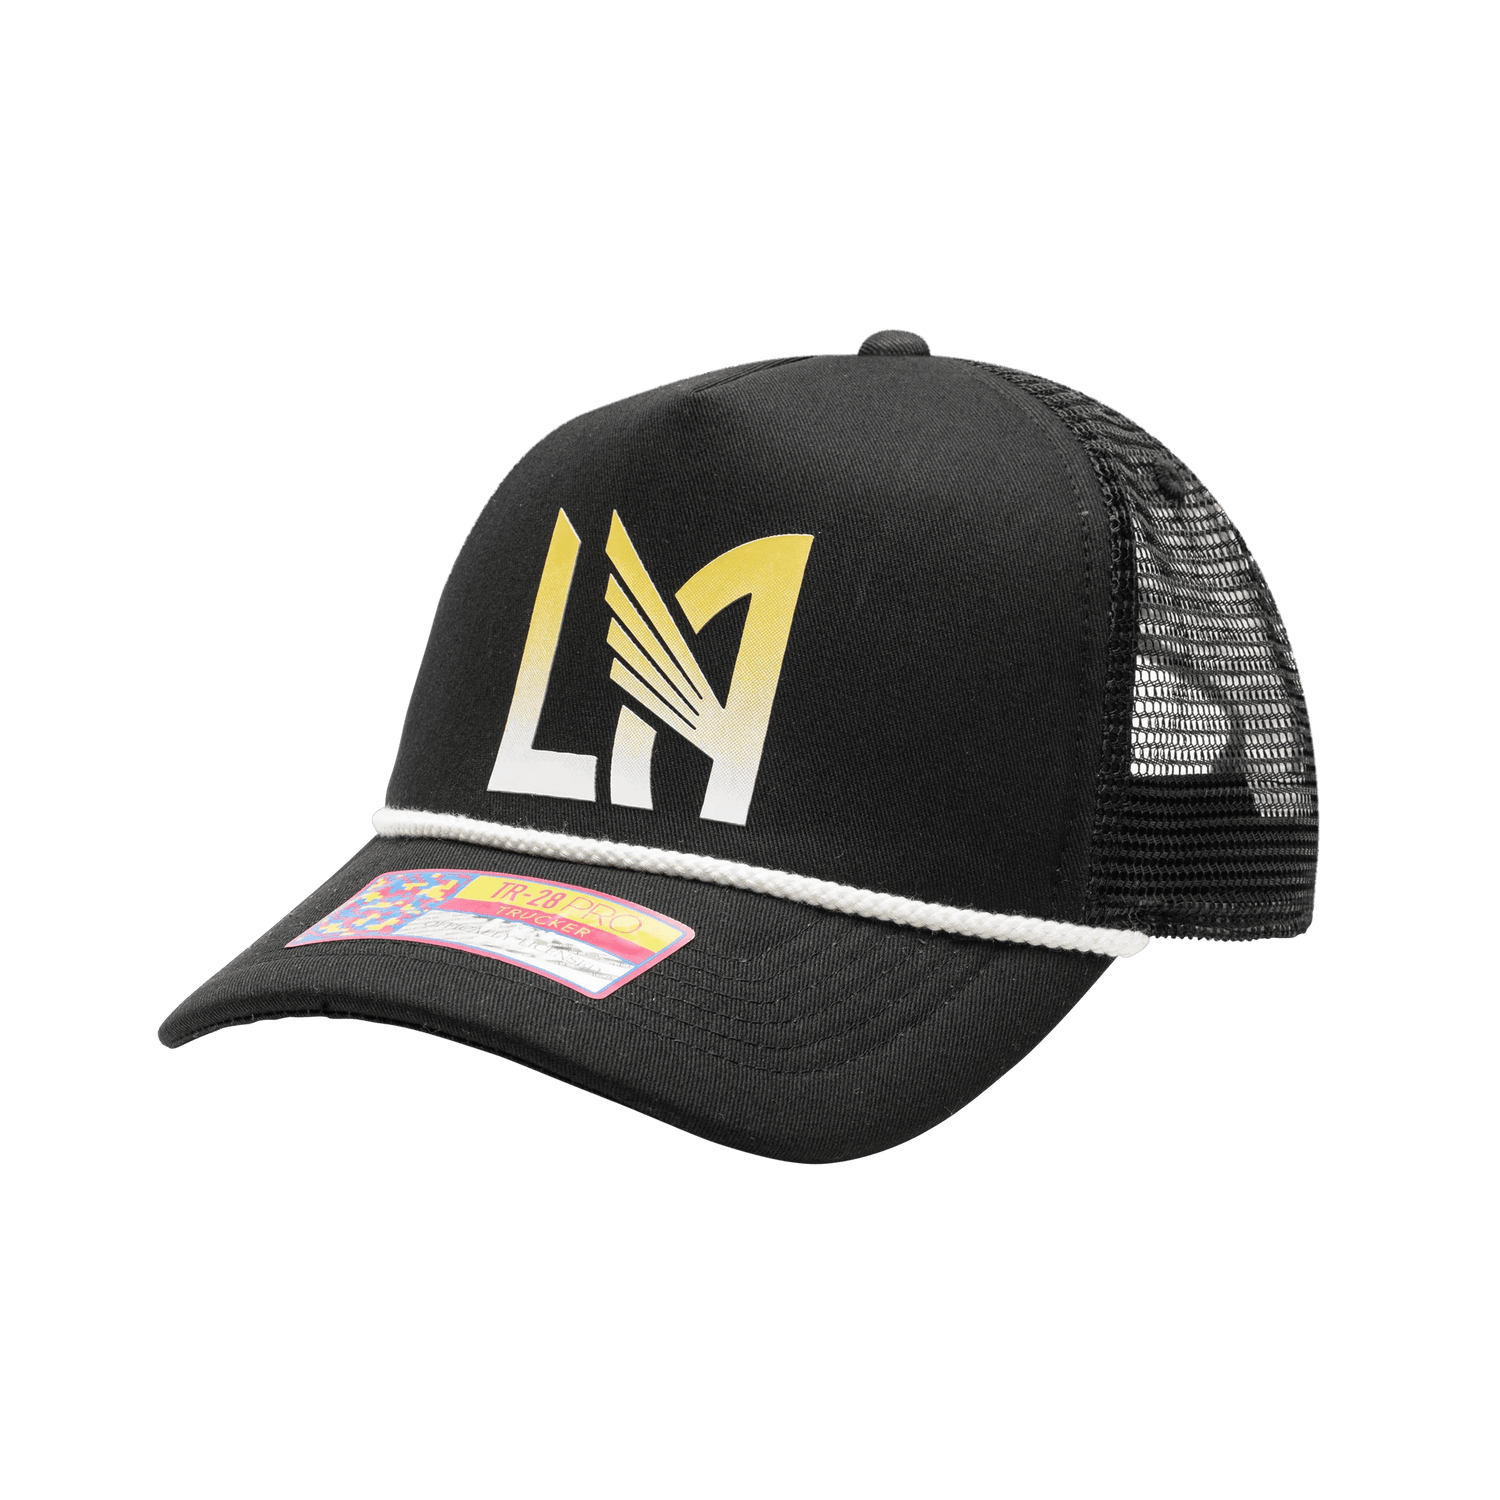 FI Collection LAFC Atmosphere Trucker Hat (Lateral - Side 1)